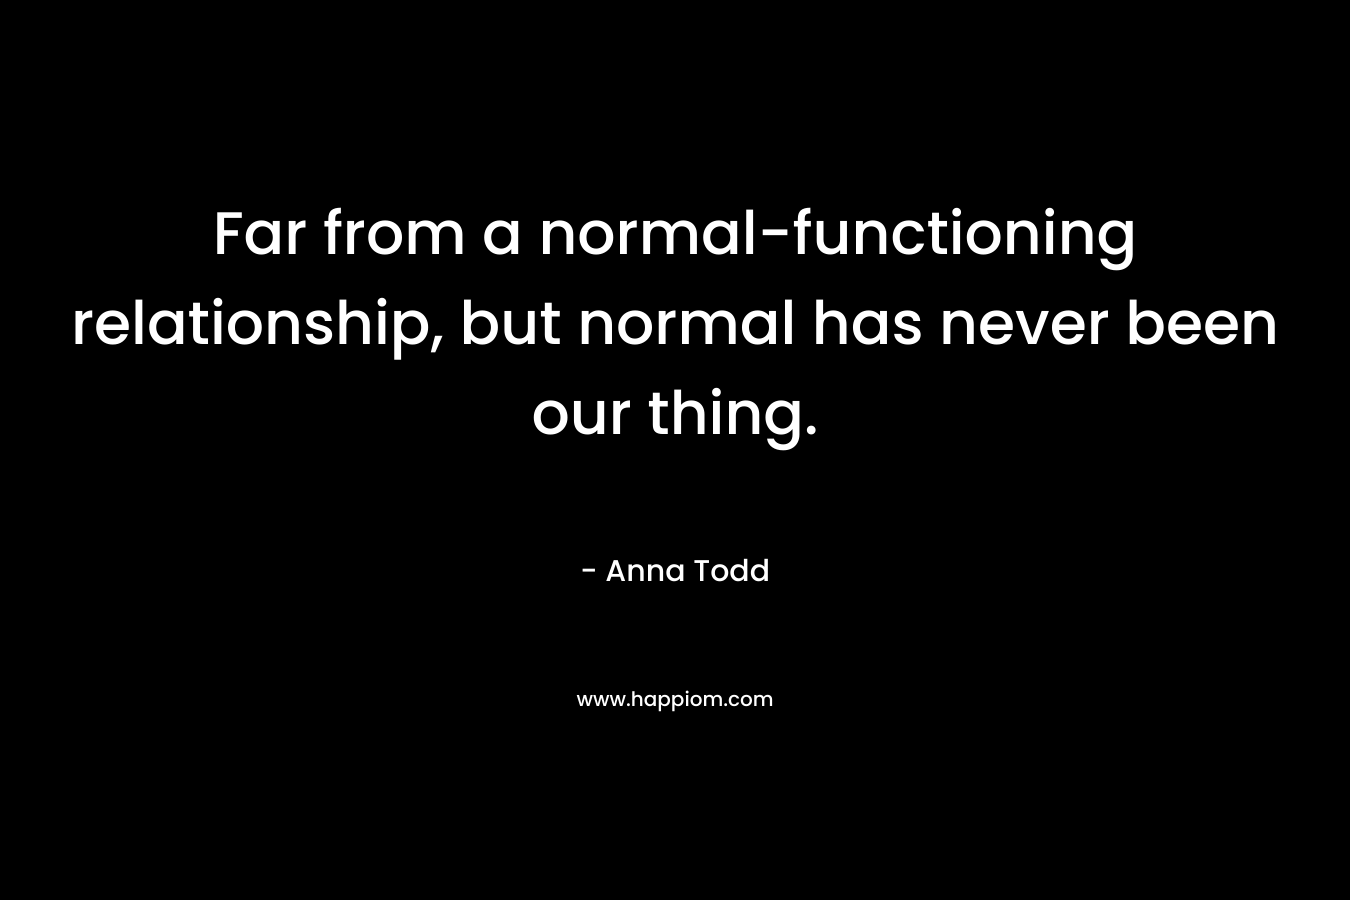 Far from a normal-functioning relationship, but normal has never been our thing.